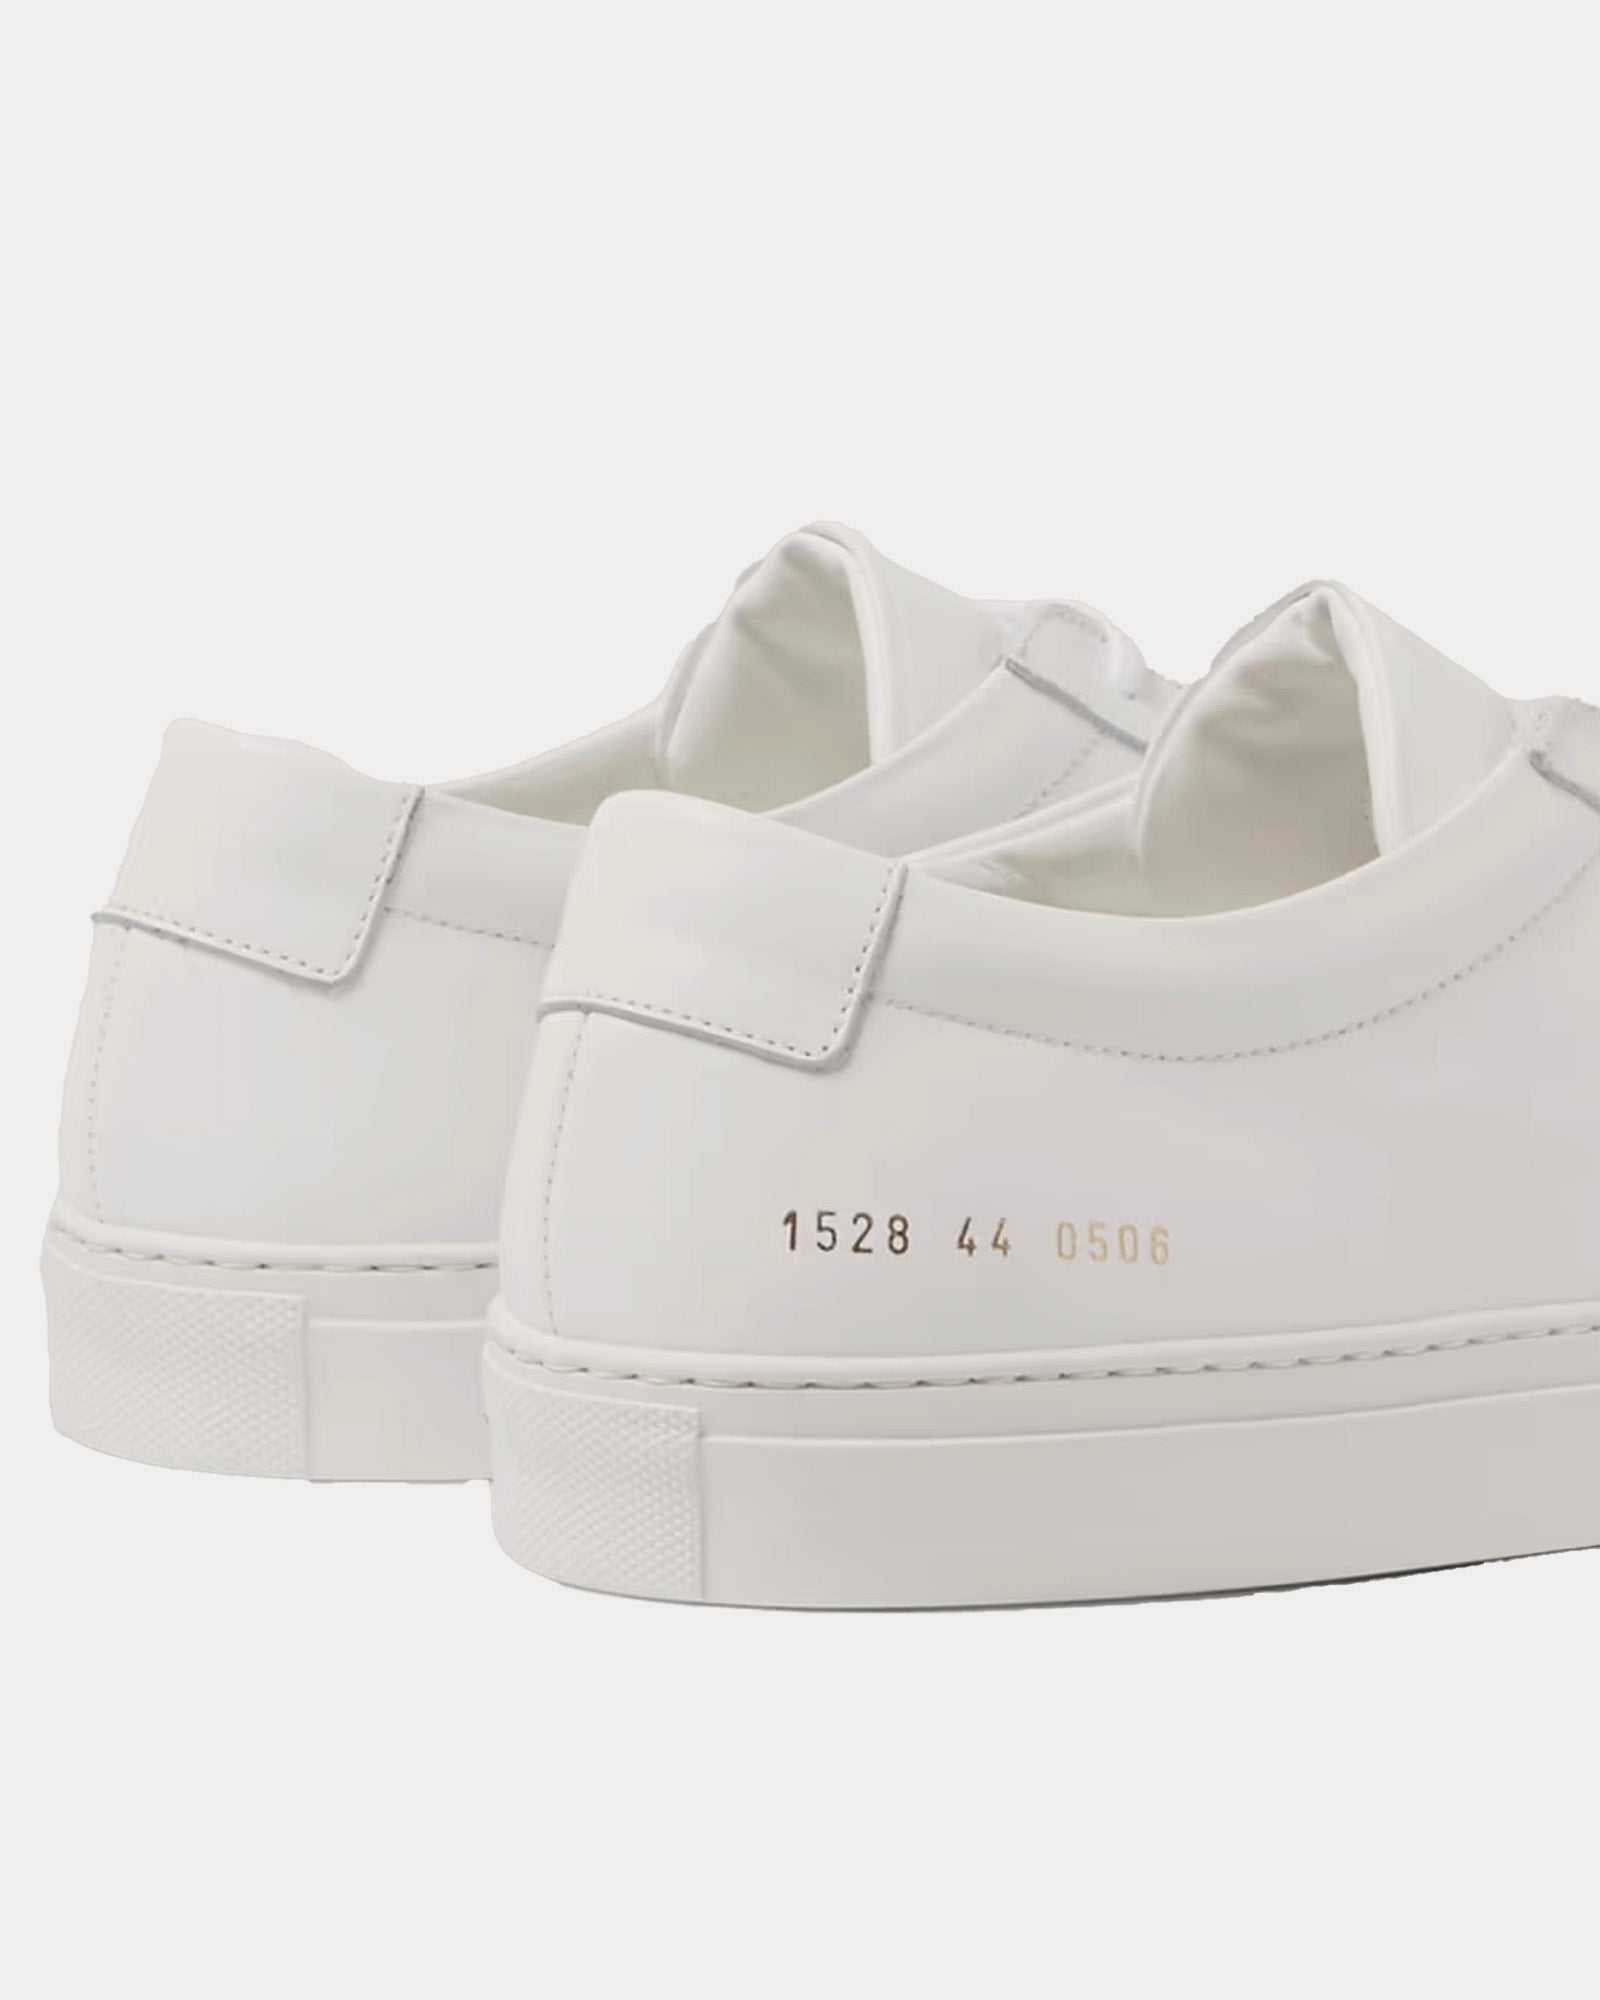 Common Projects - Original Achilles Leather White Low Top Sneakers